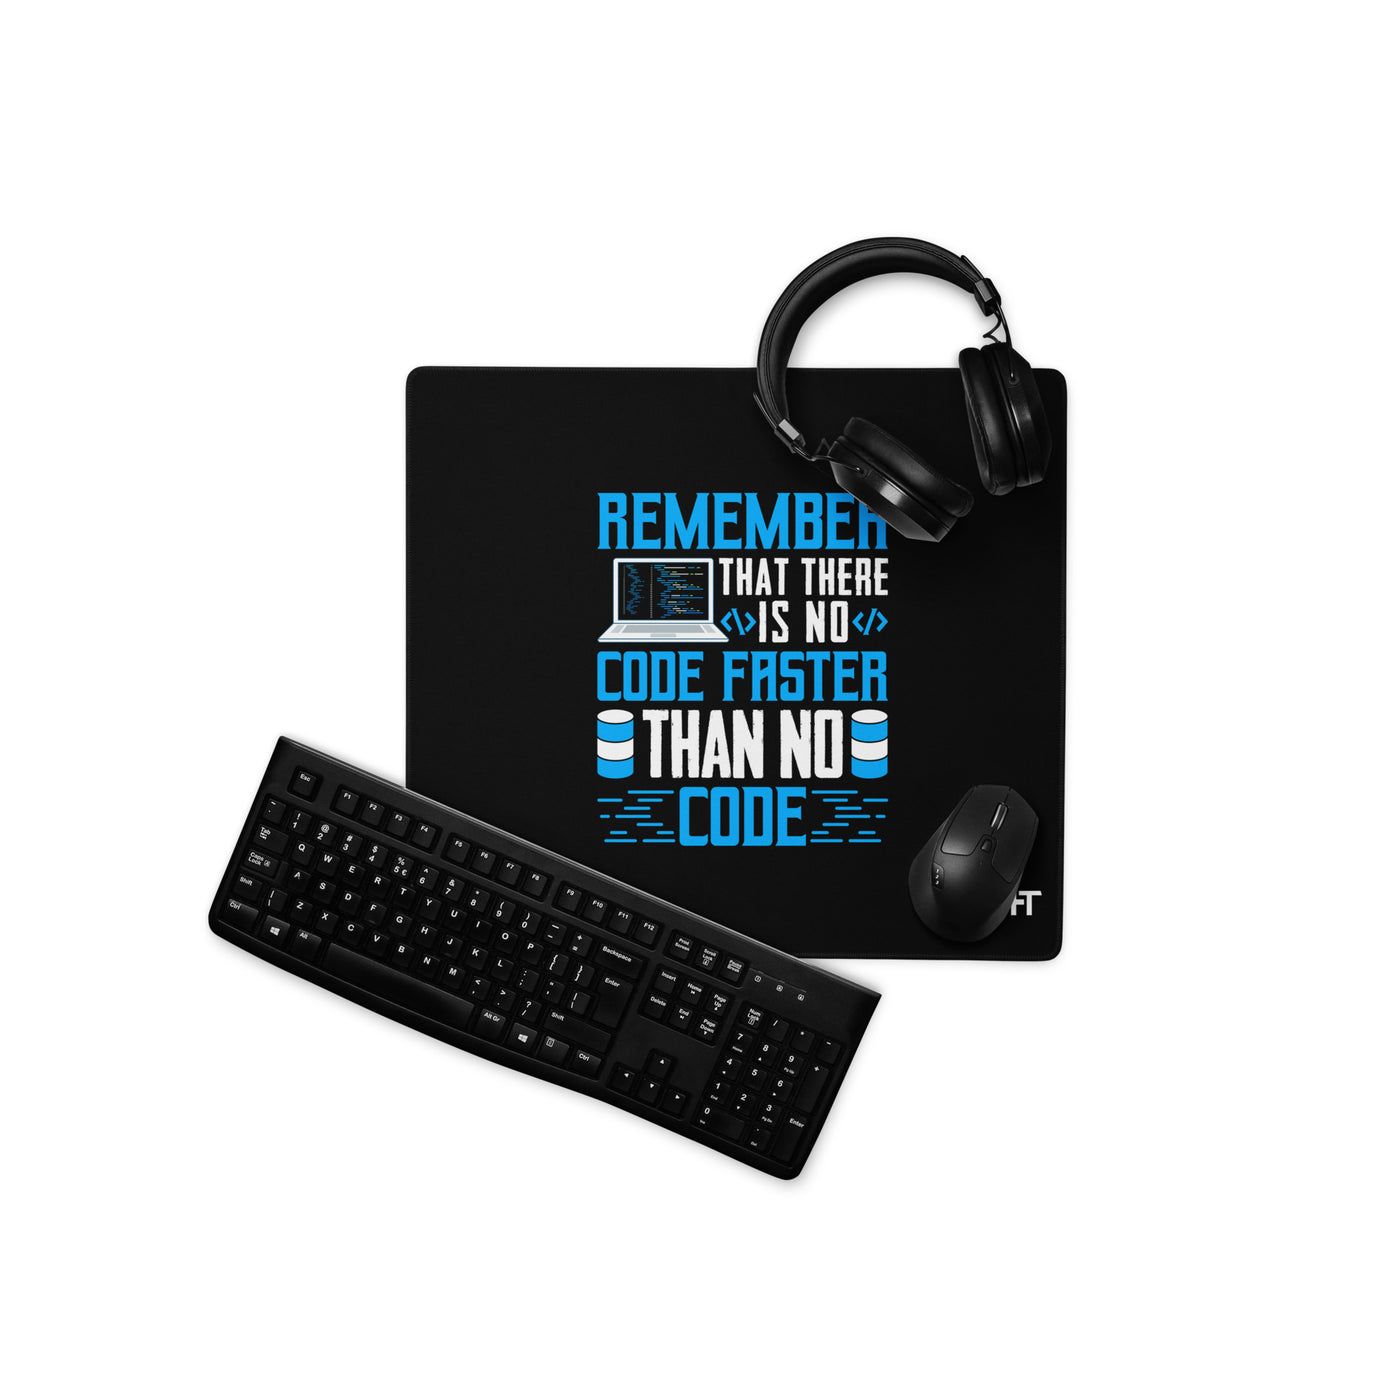 Remember! There is no code - Desk Mat